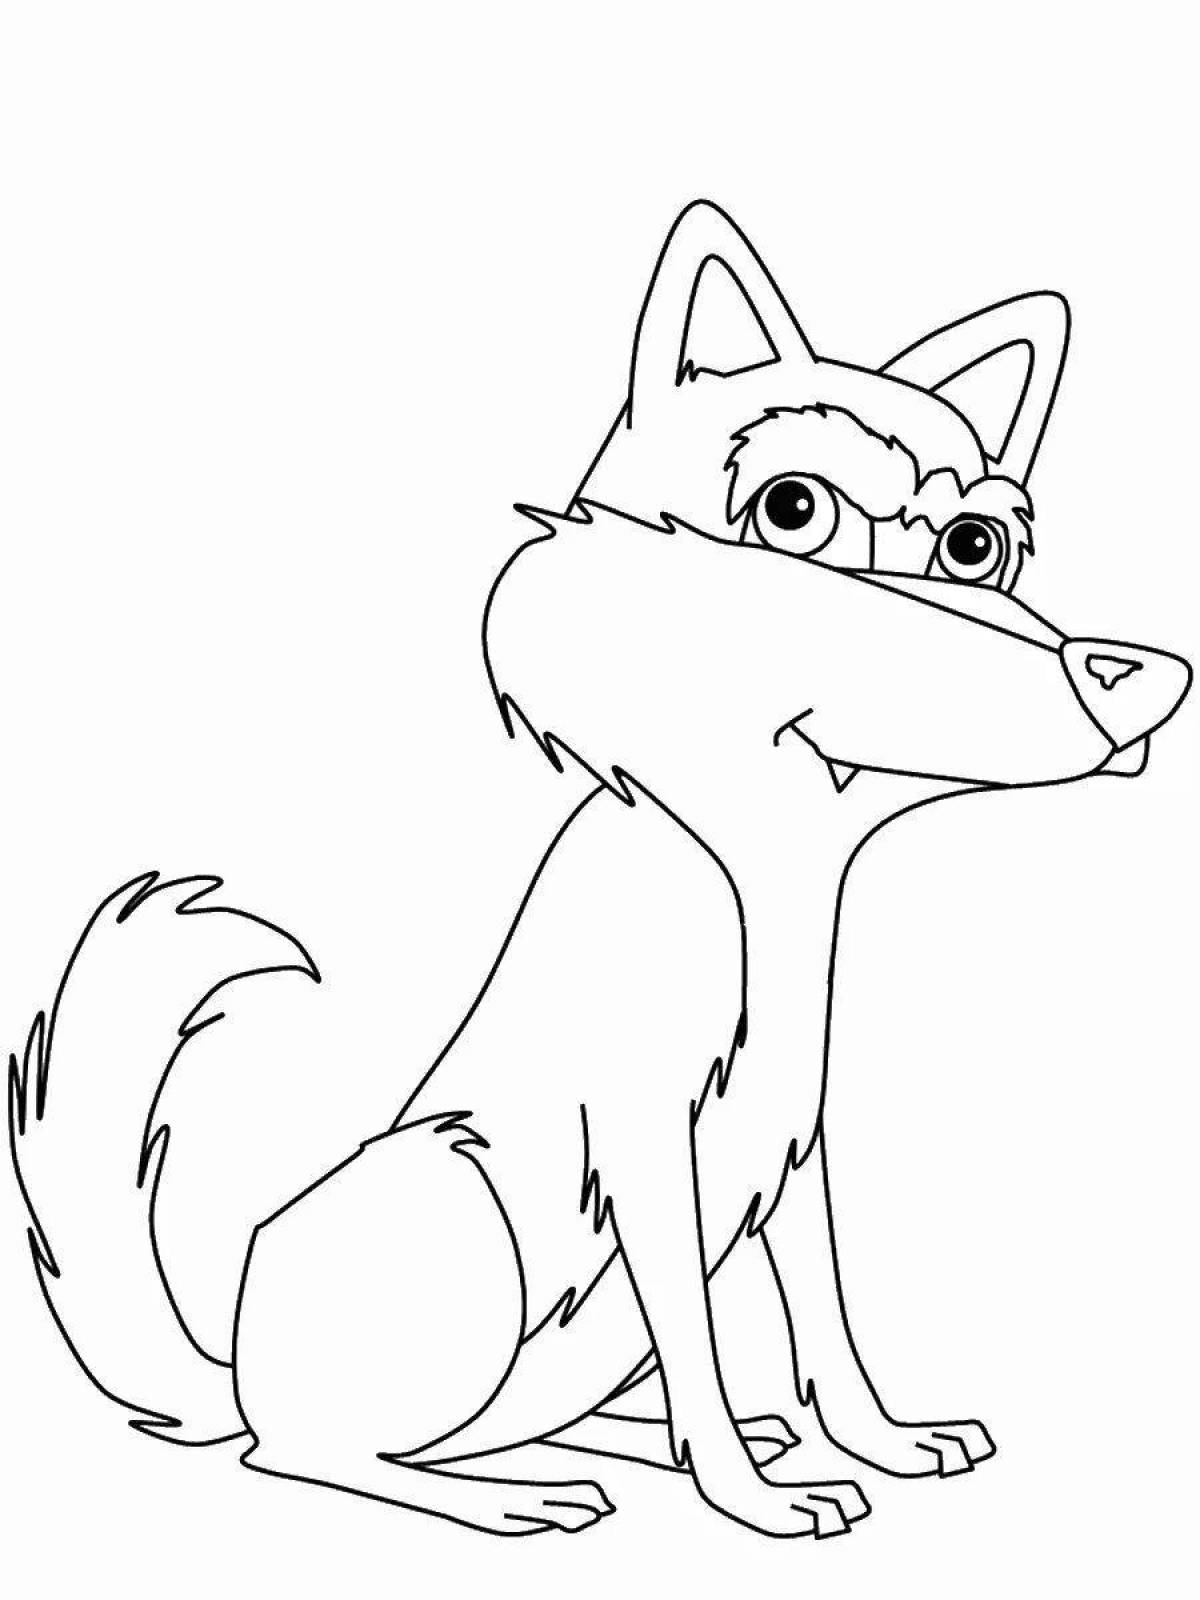 Majestic wolf drawing for kids